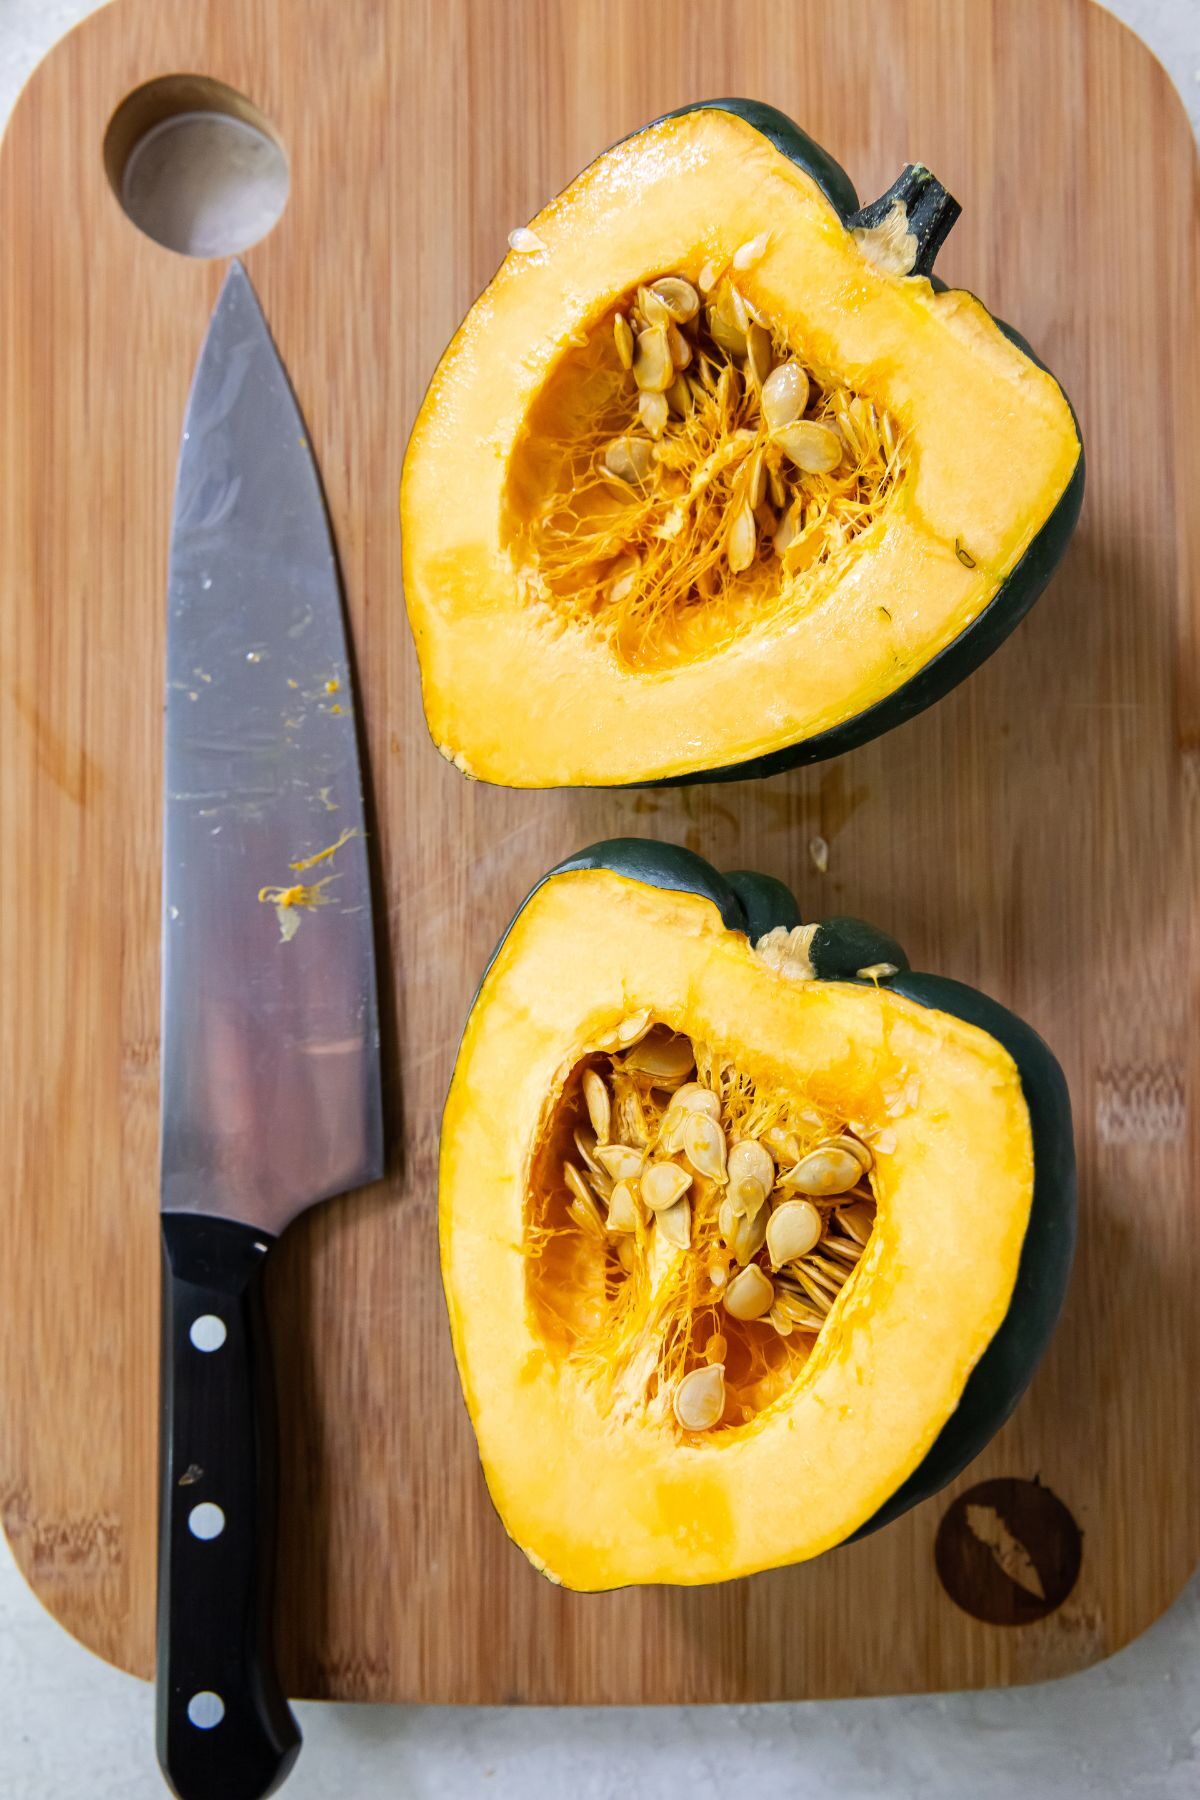 Halved acorn squash with a chef knife to the left both on a wooden cutting board.